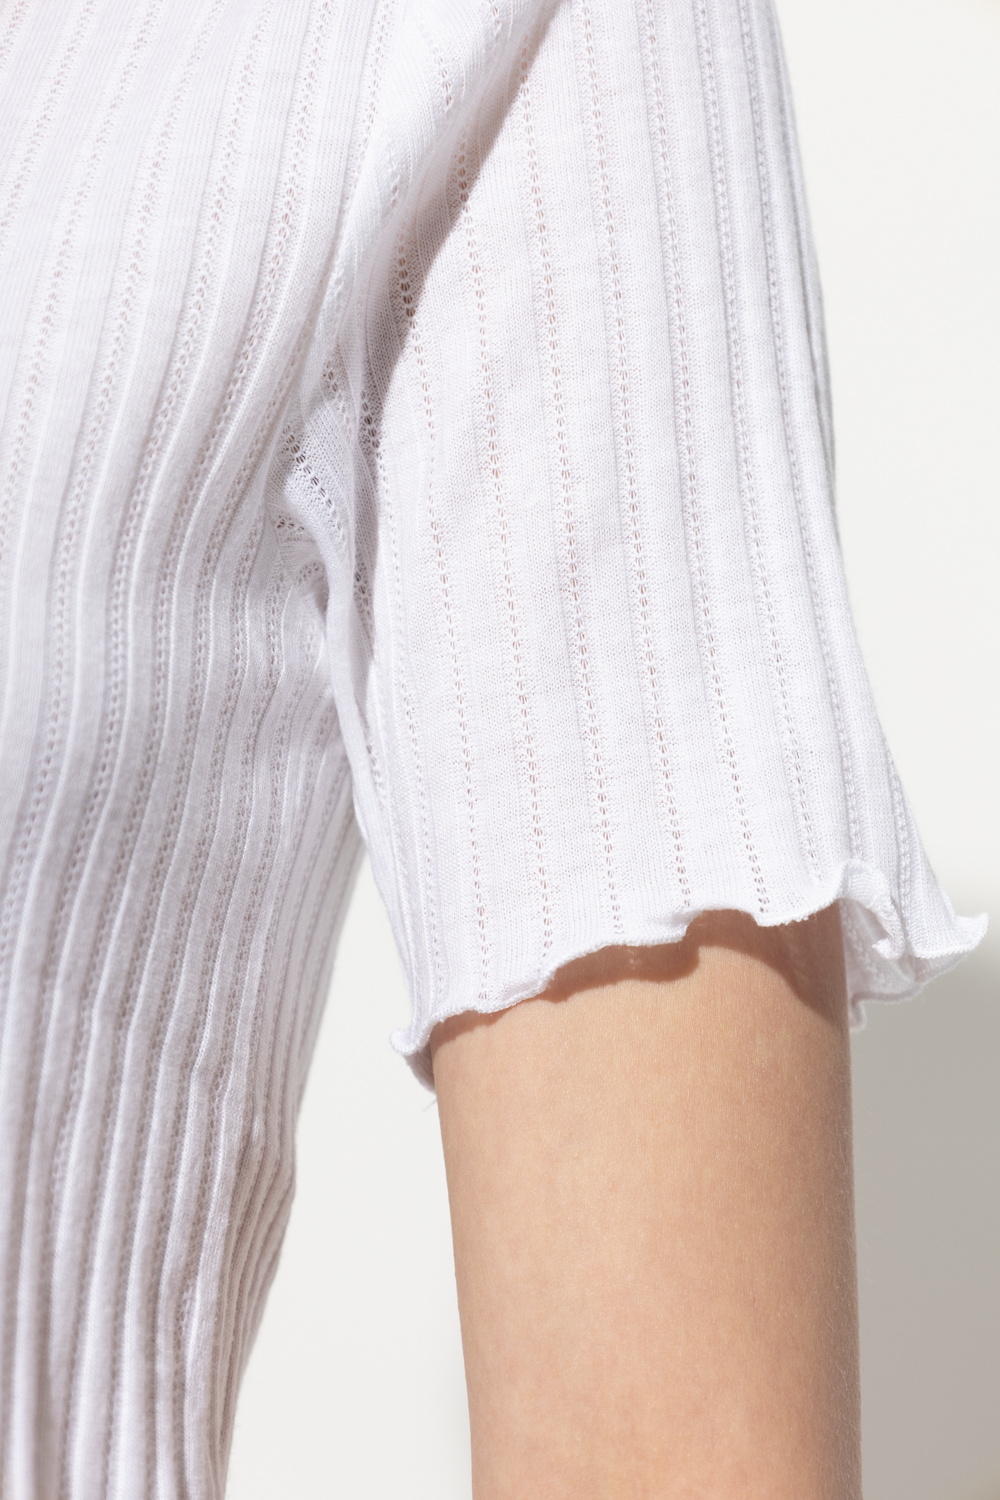 A.P.C. Ribbed top